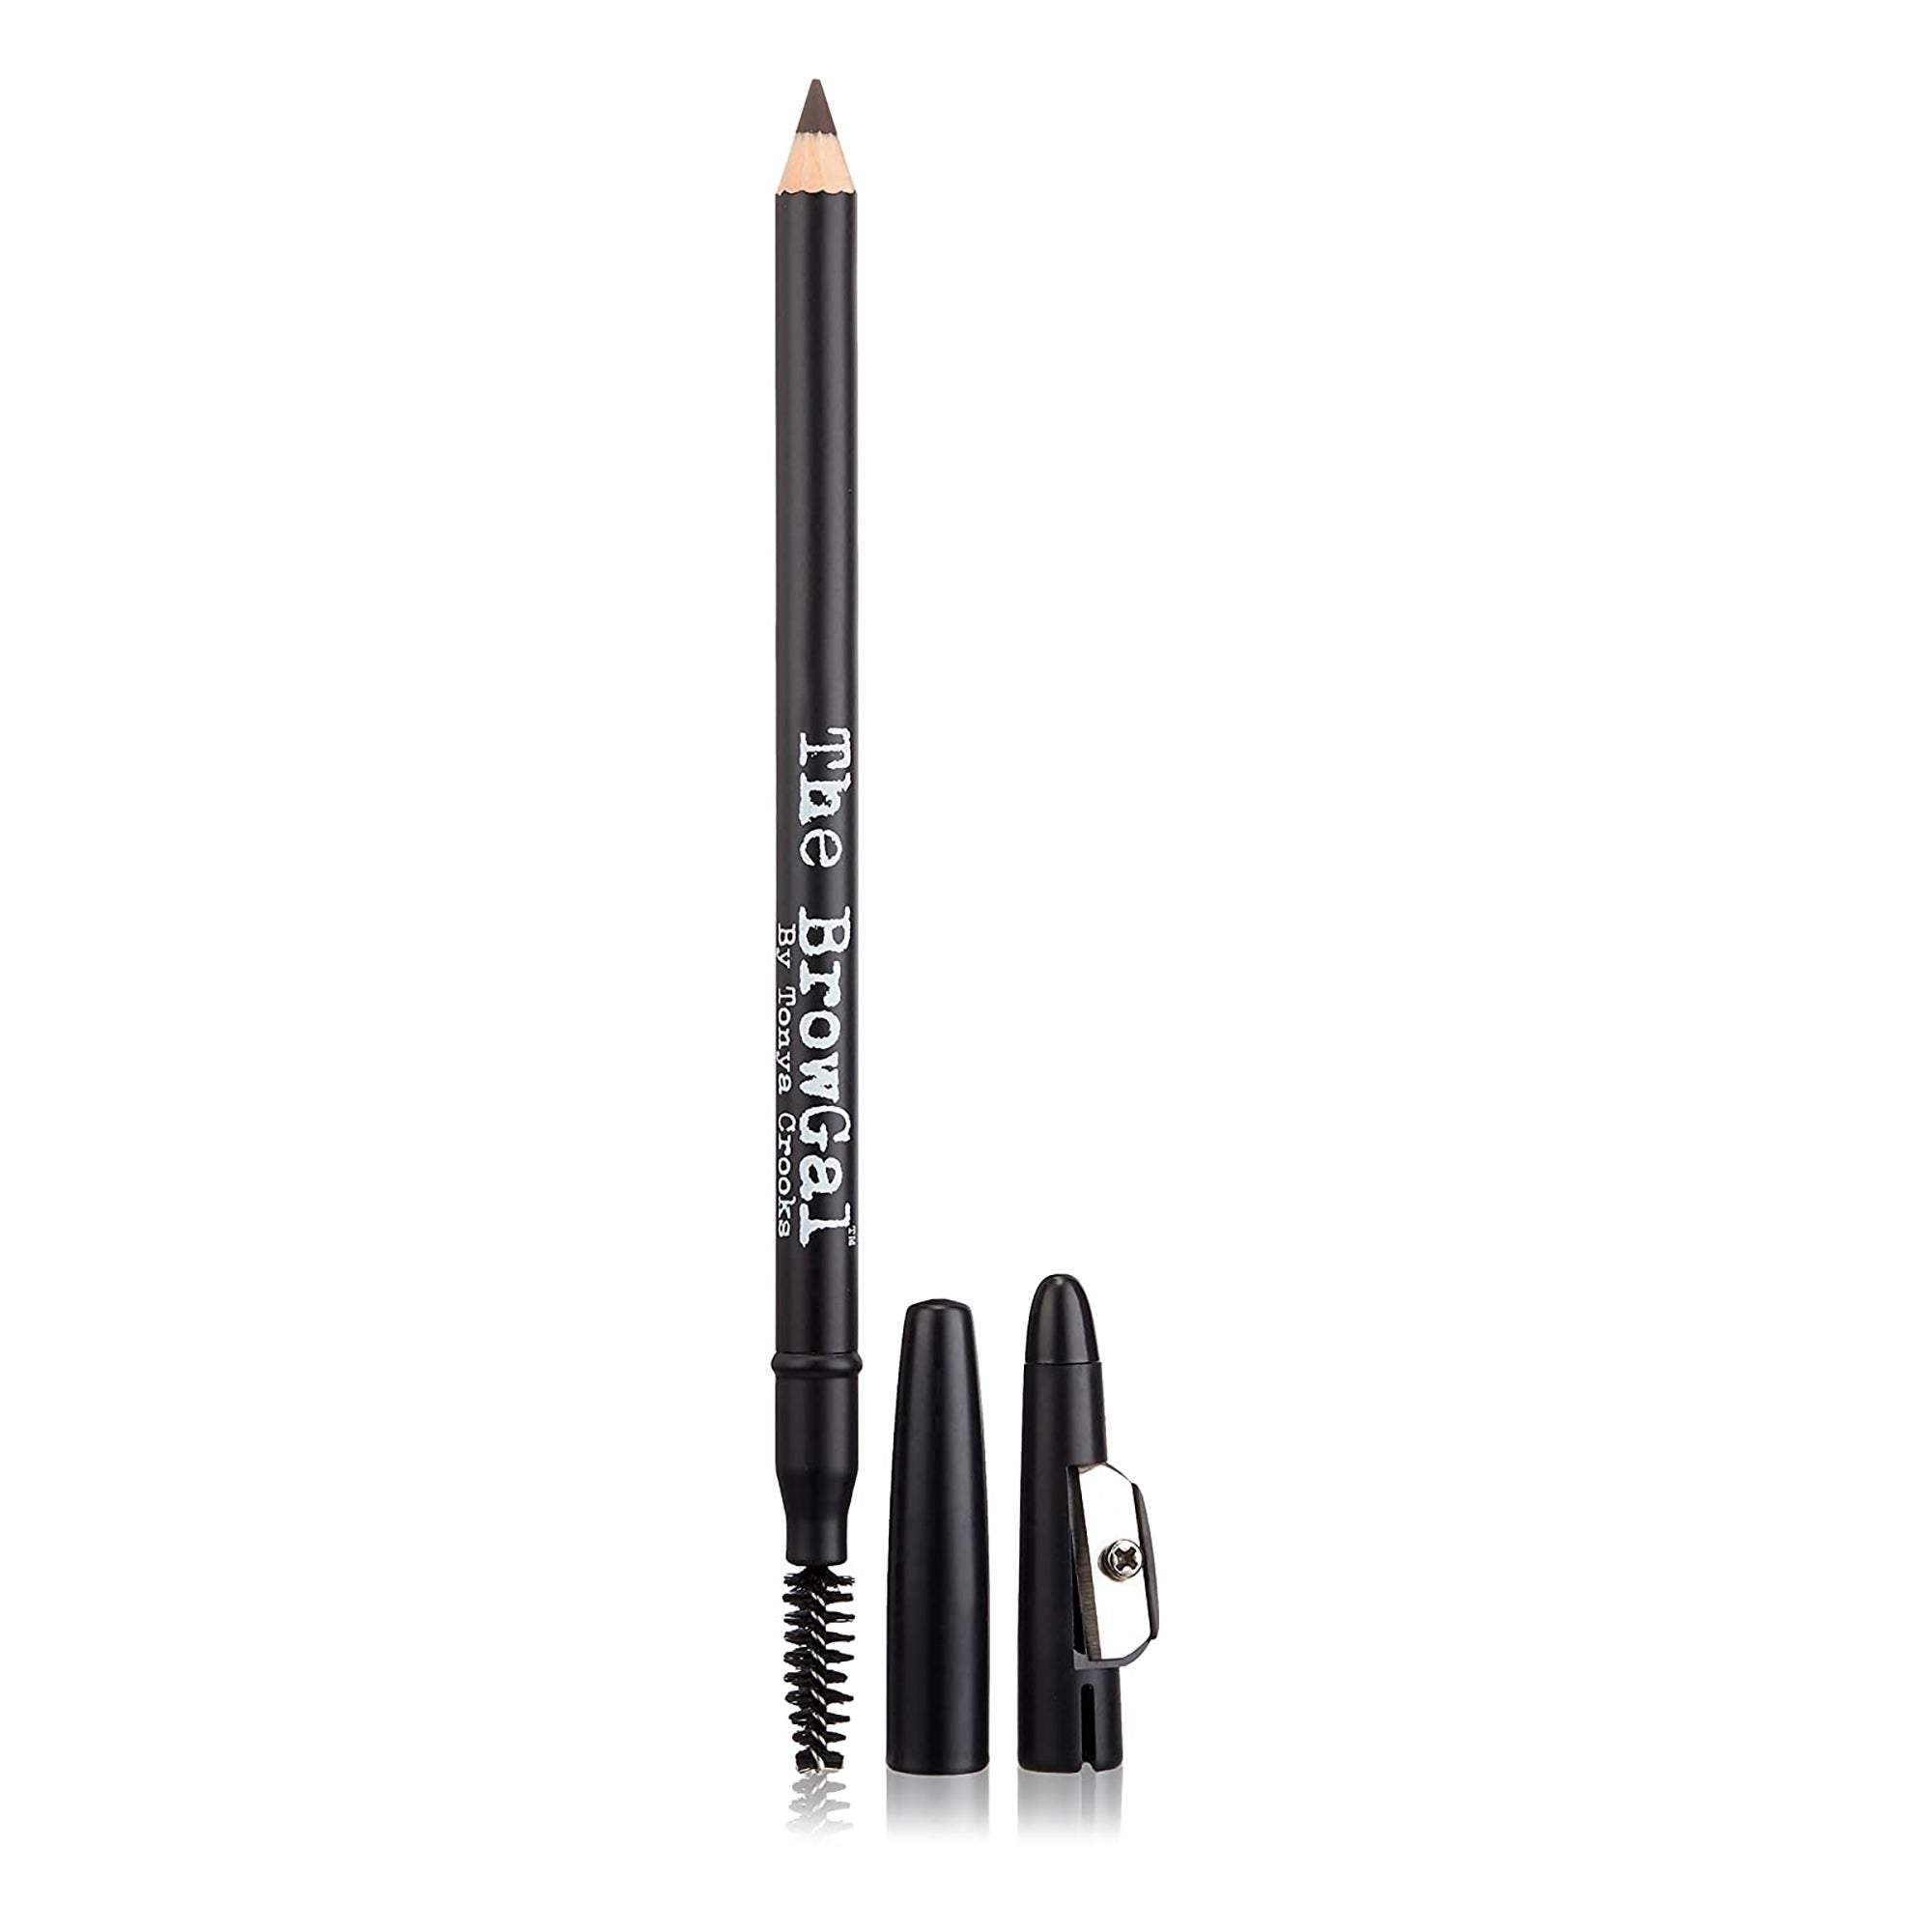 The BrowGal Skinny Eyebrow Pencil Chocolate Color